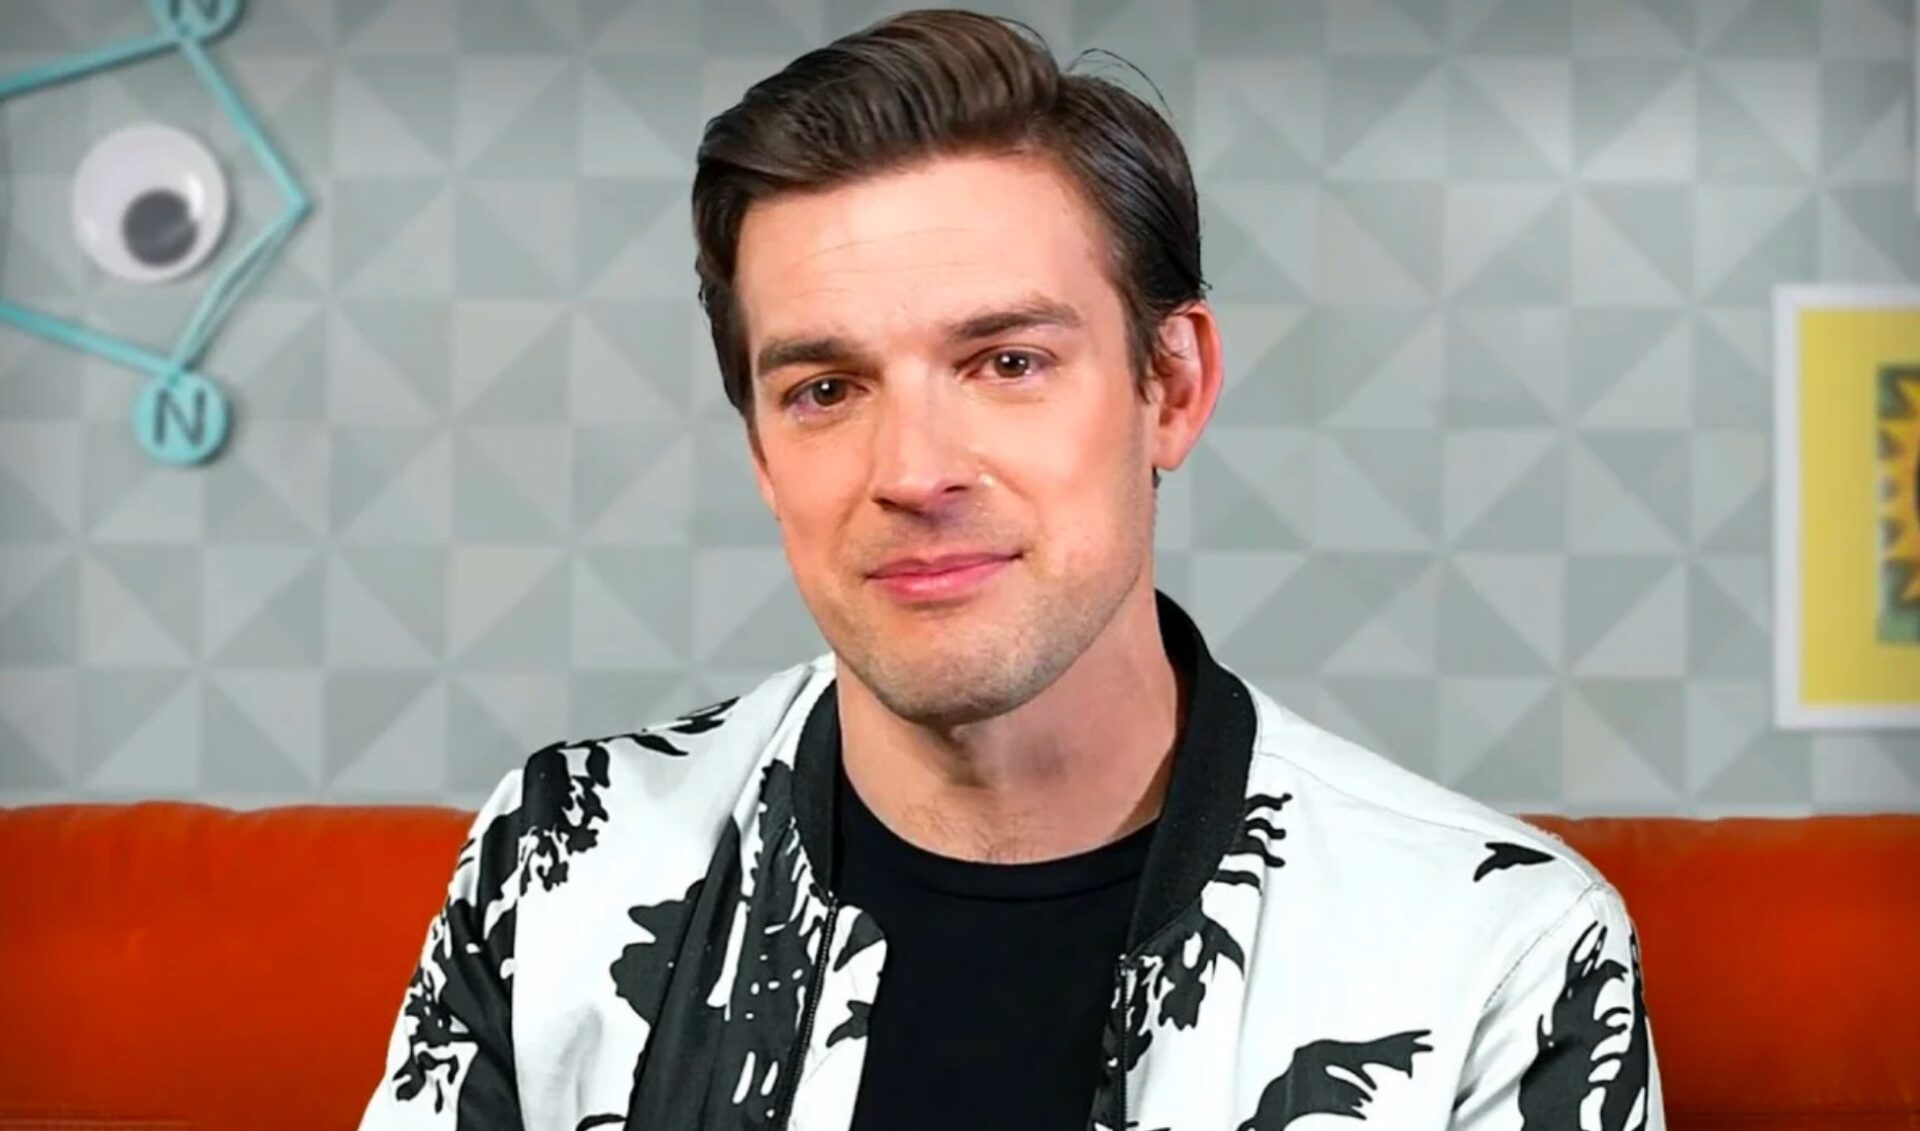 MatPat, fresh off his retirement from Theory videos, will be a Featured Creator at VidCon 2024